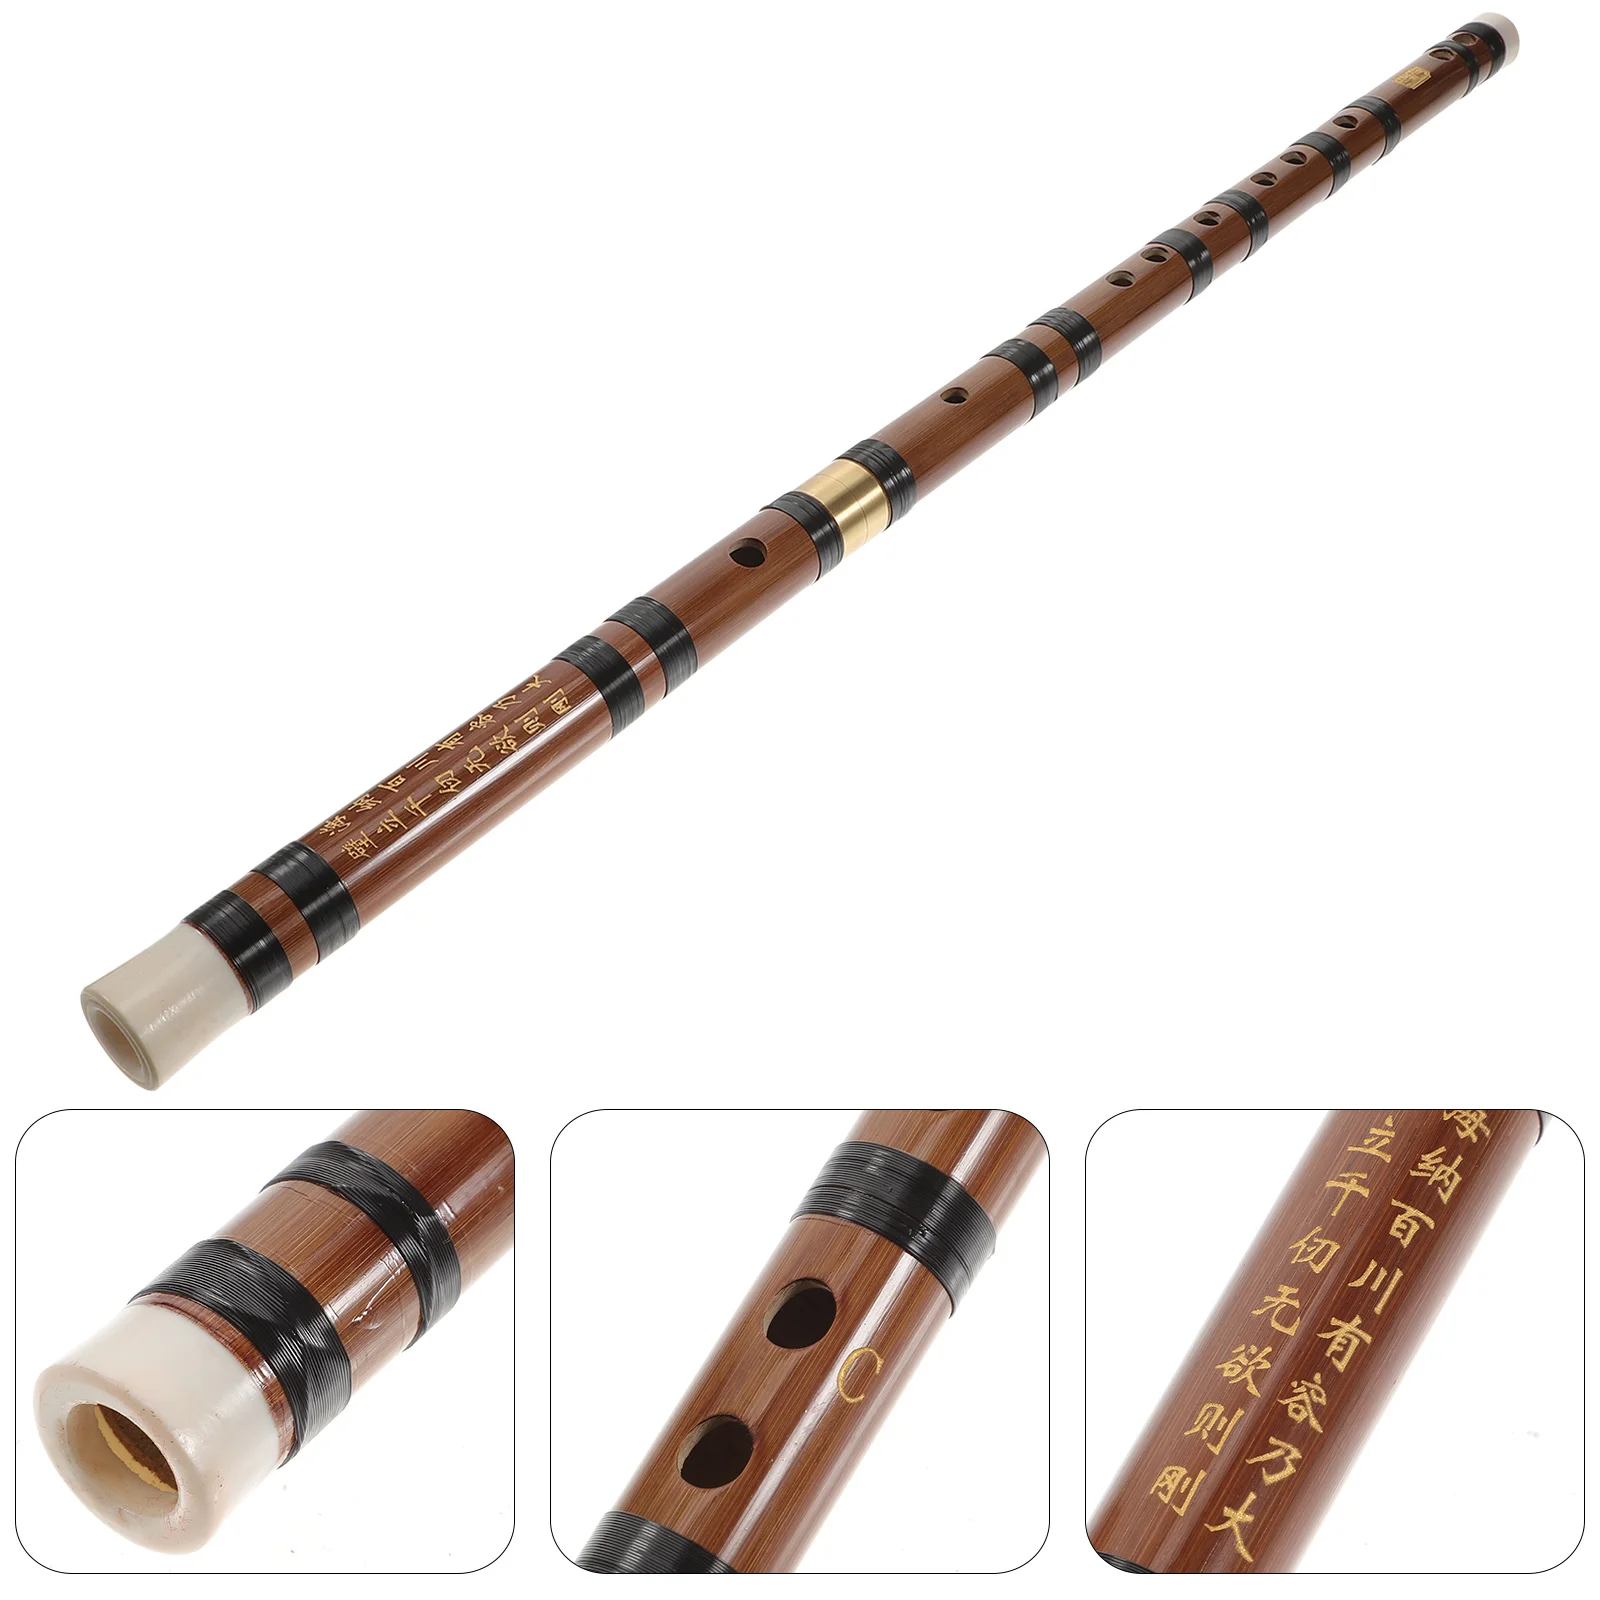 

Two-section Flute Traditional Chinese Bamboo Woodwind Musical Instrument Instruments Vintage for Beginners Student